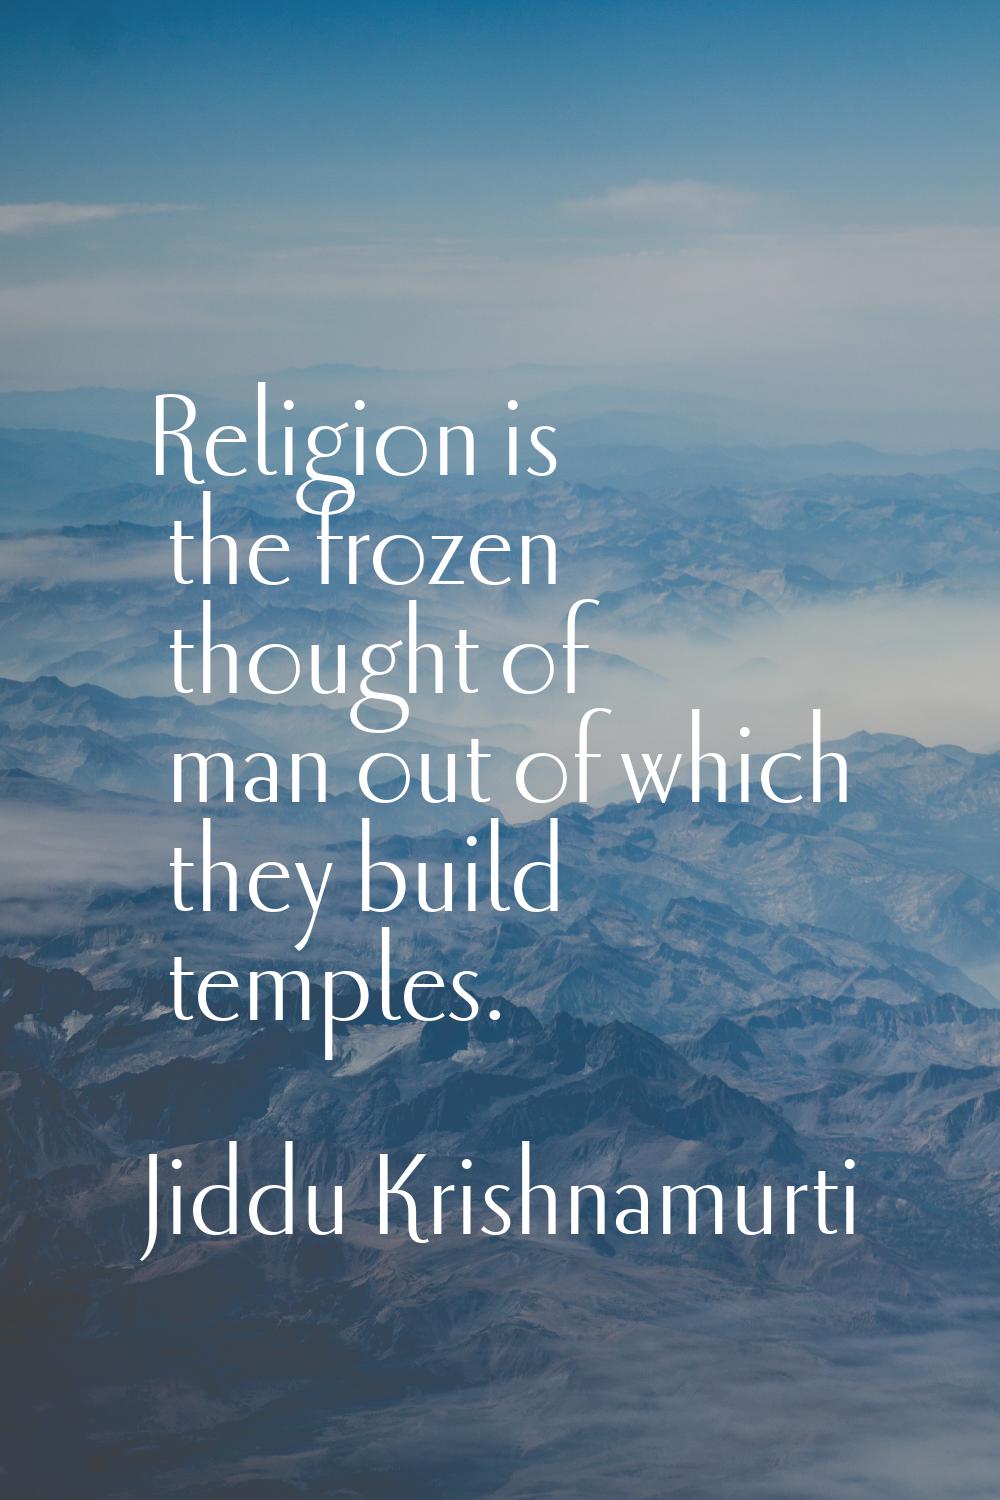 Religion is the frozen thought of man out of which they build temples.